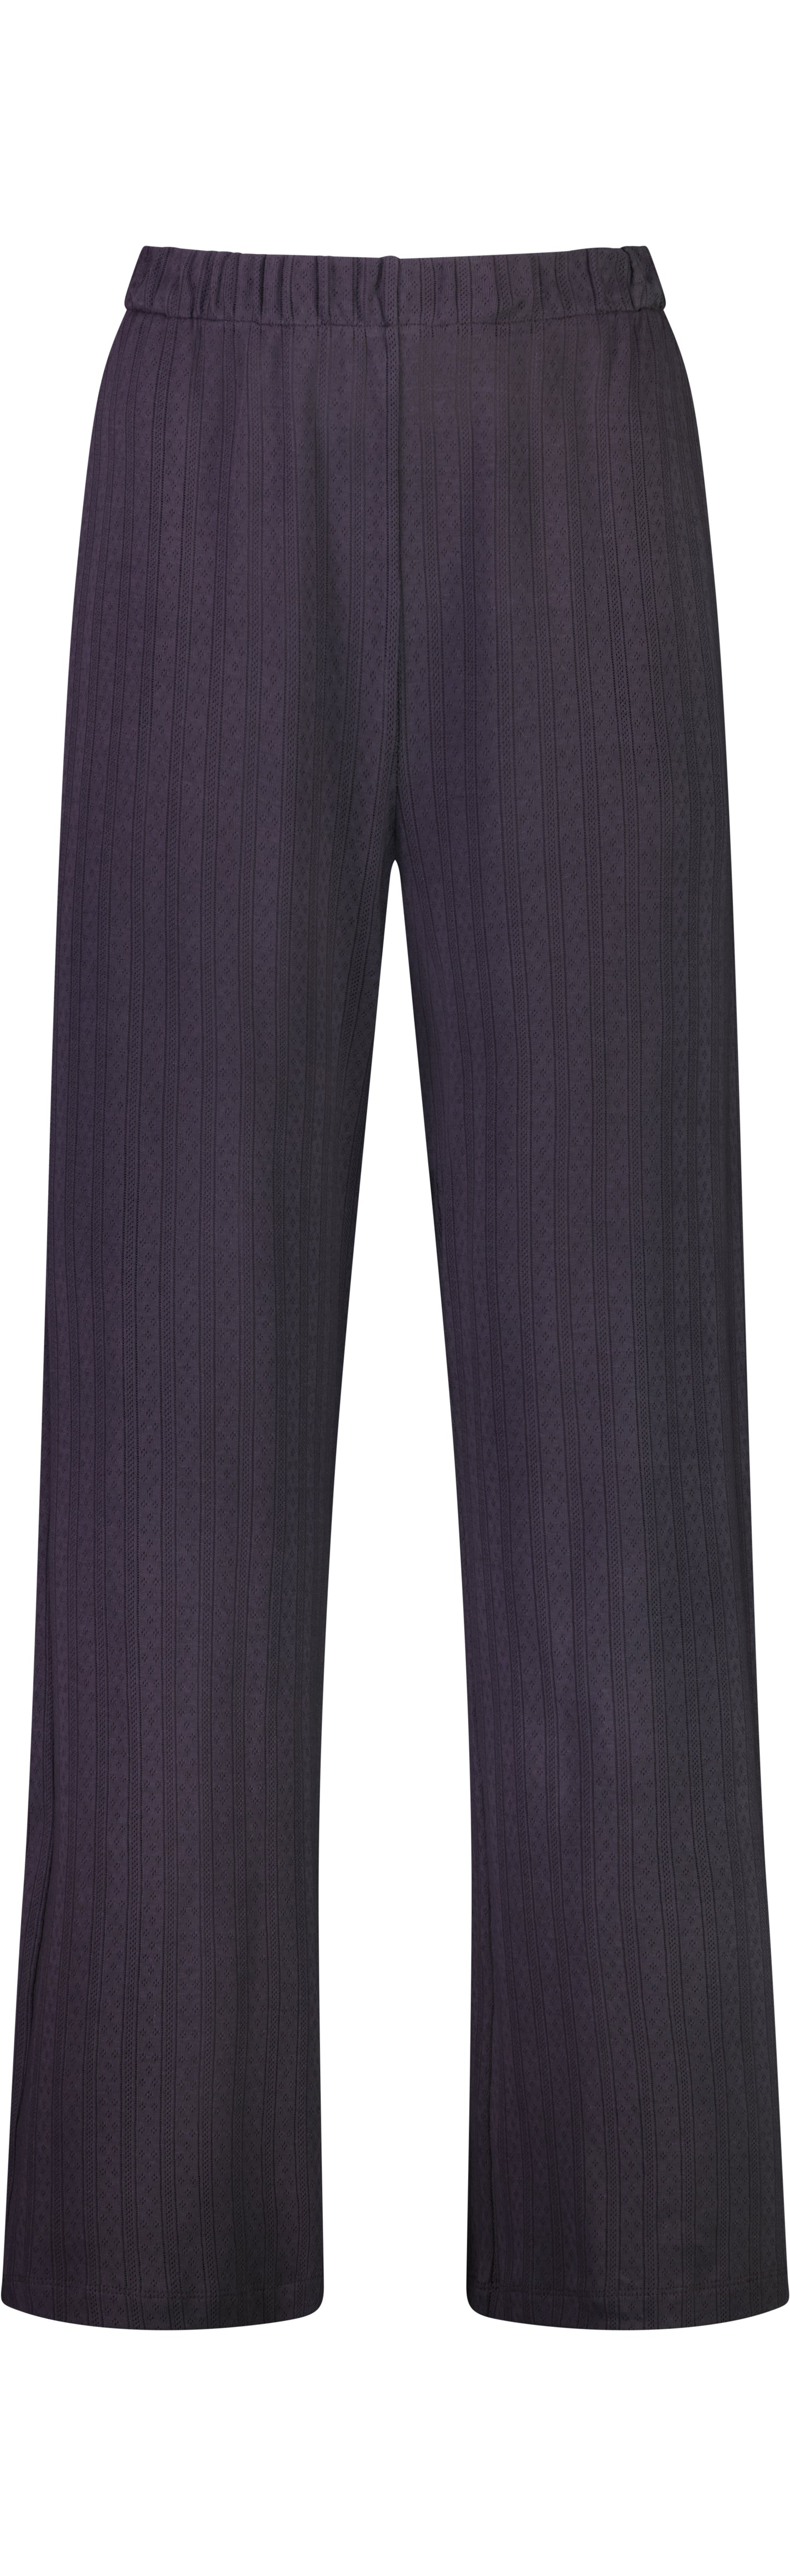 Essential Lounge Pant Pointelle